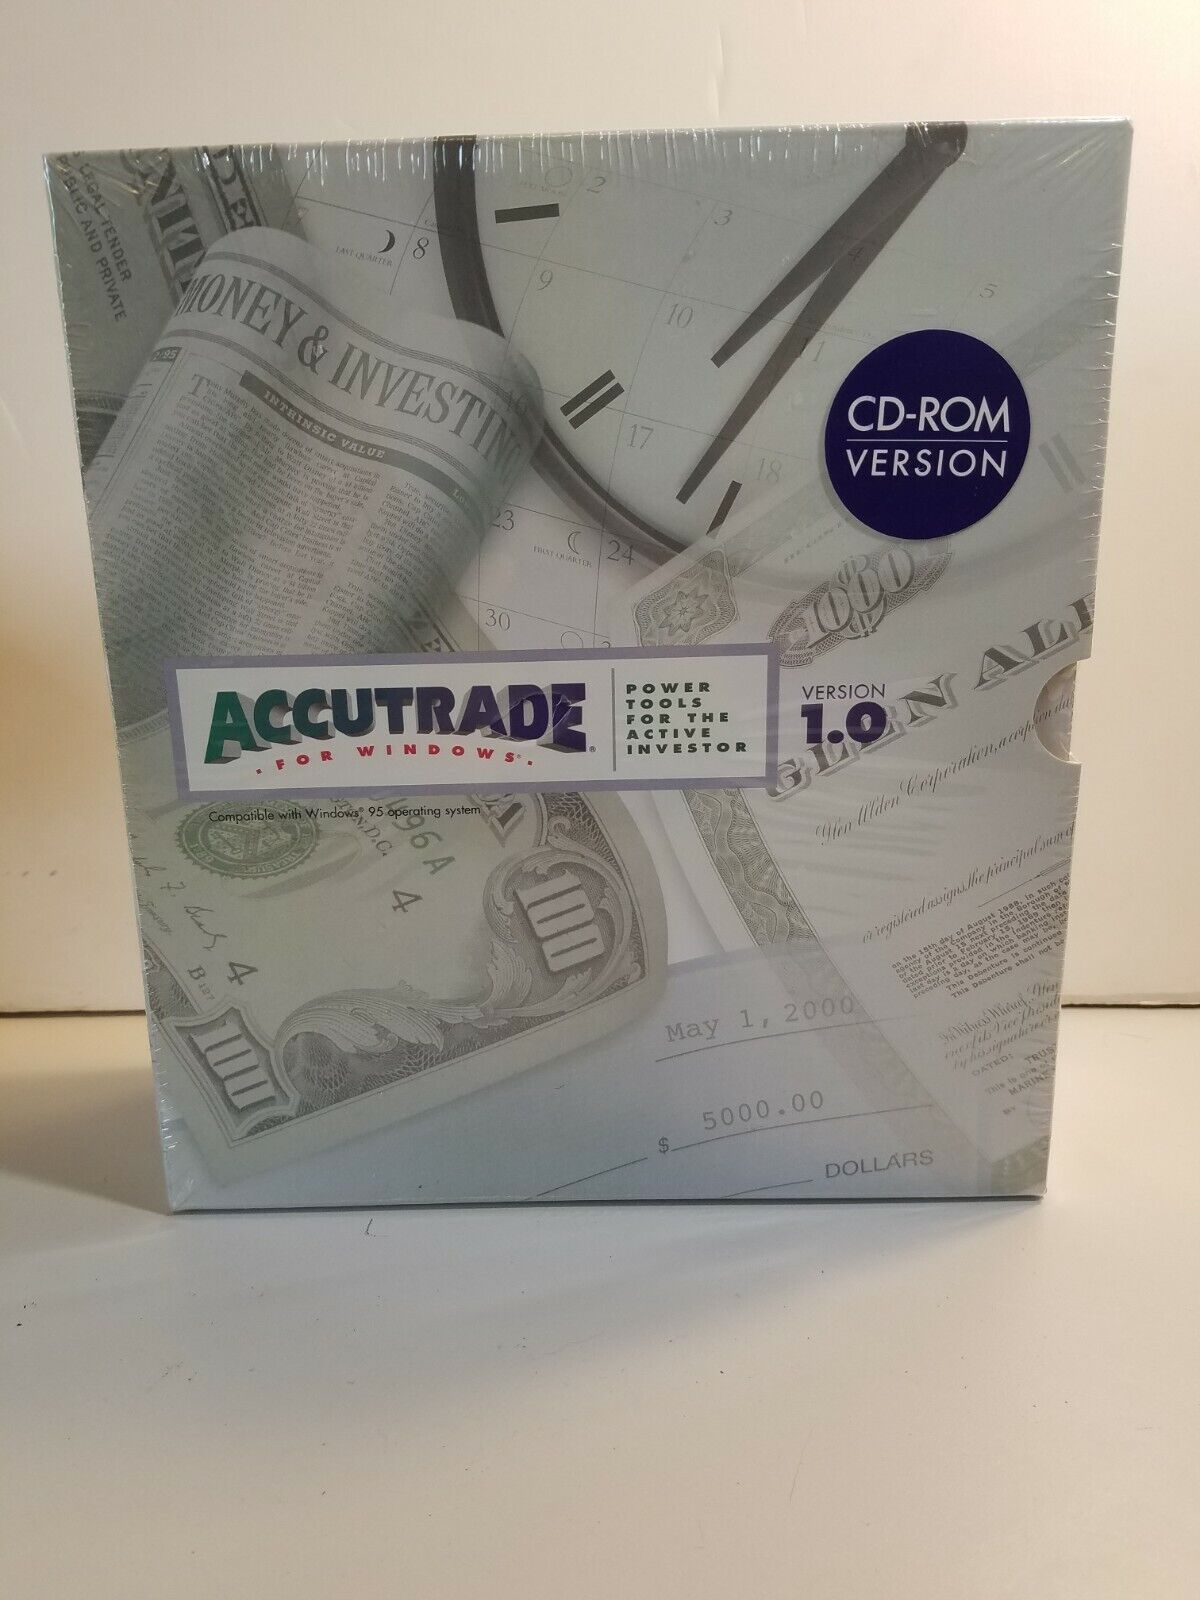  ACCUTRADE 1.0 WINDOWS PC TRADING SOFTWARE FOR Power Tools For Finance Investors